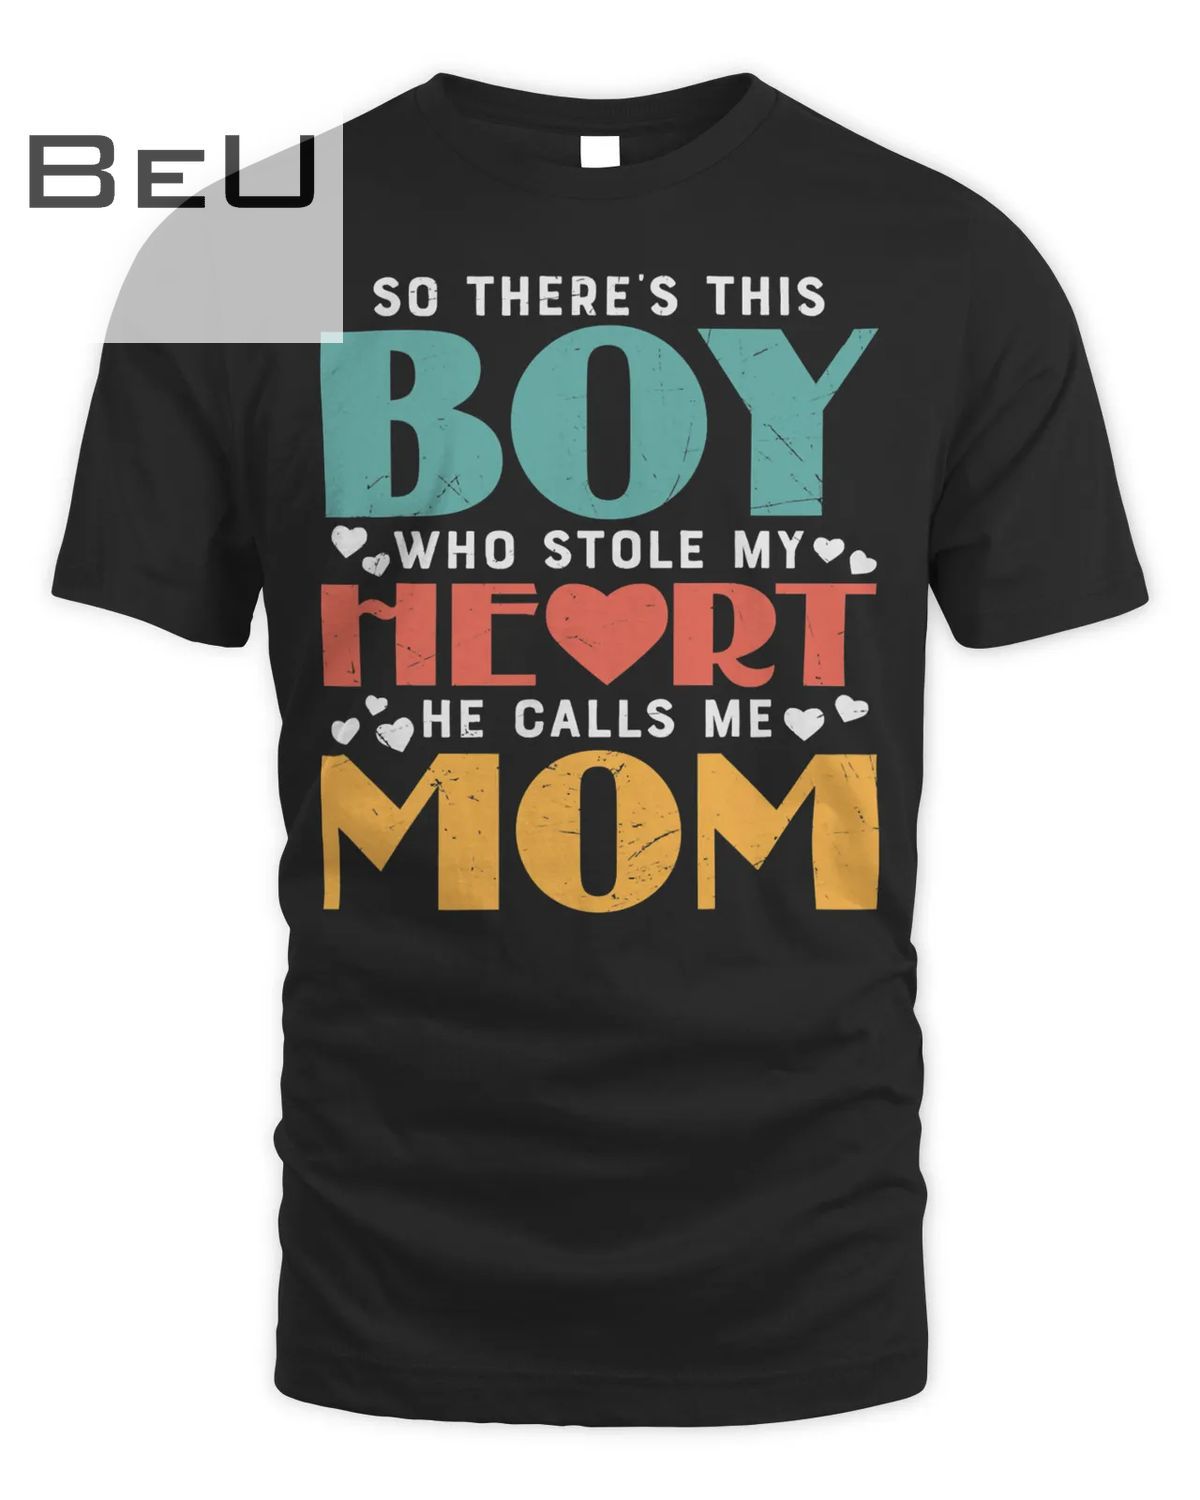 So There's This Boy Who Stole My Heart He Calls Me Mom T-shirt